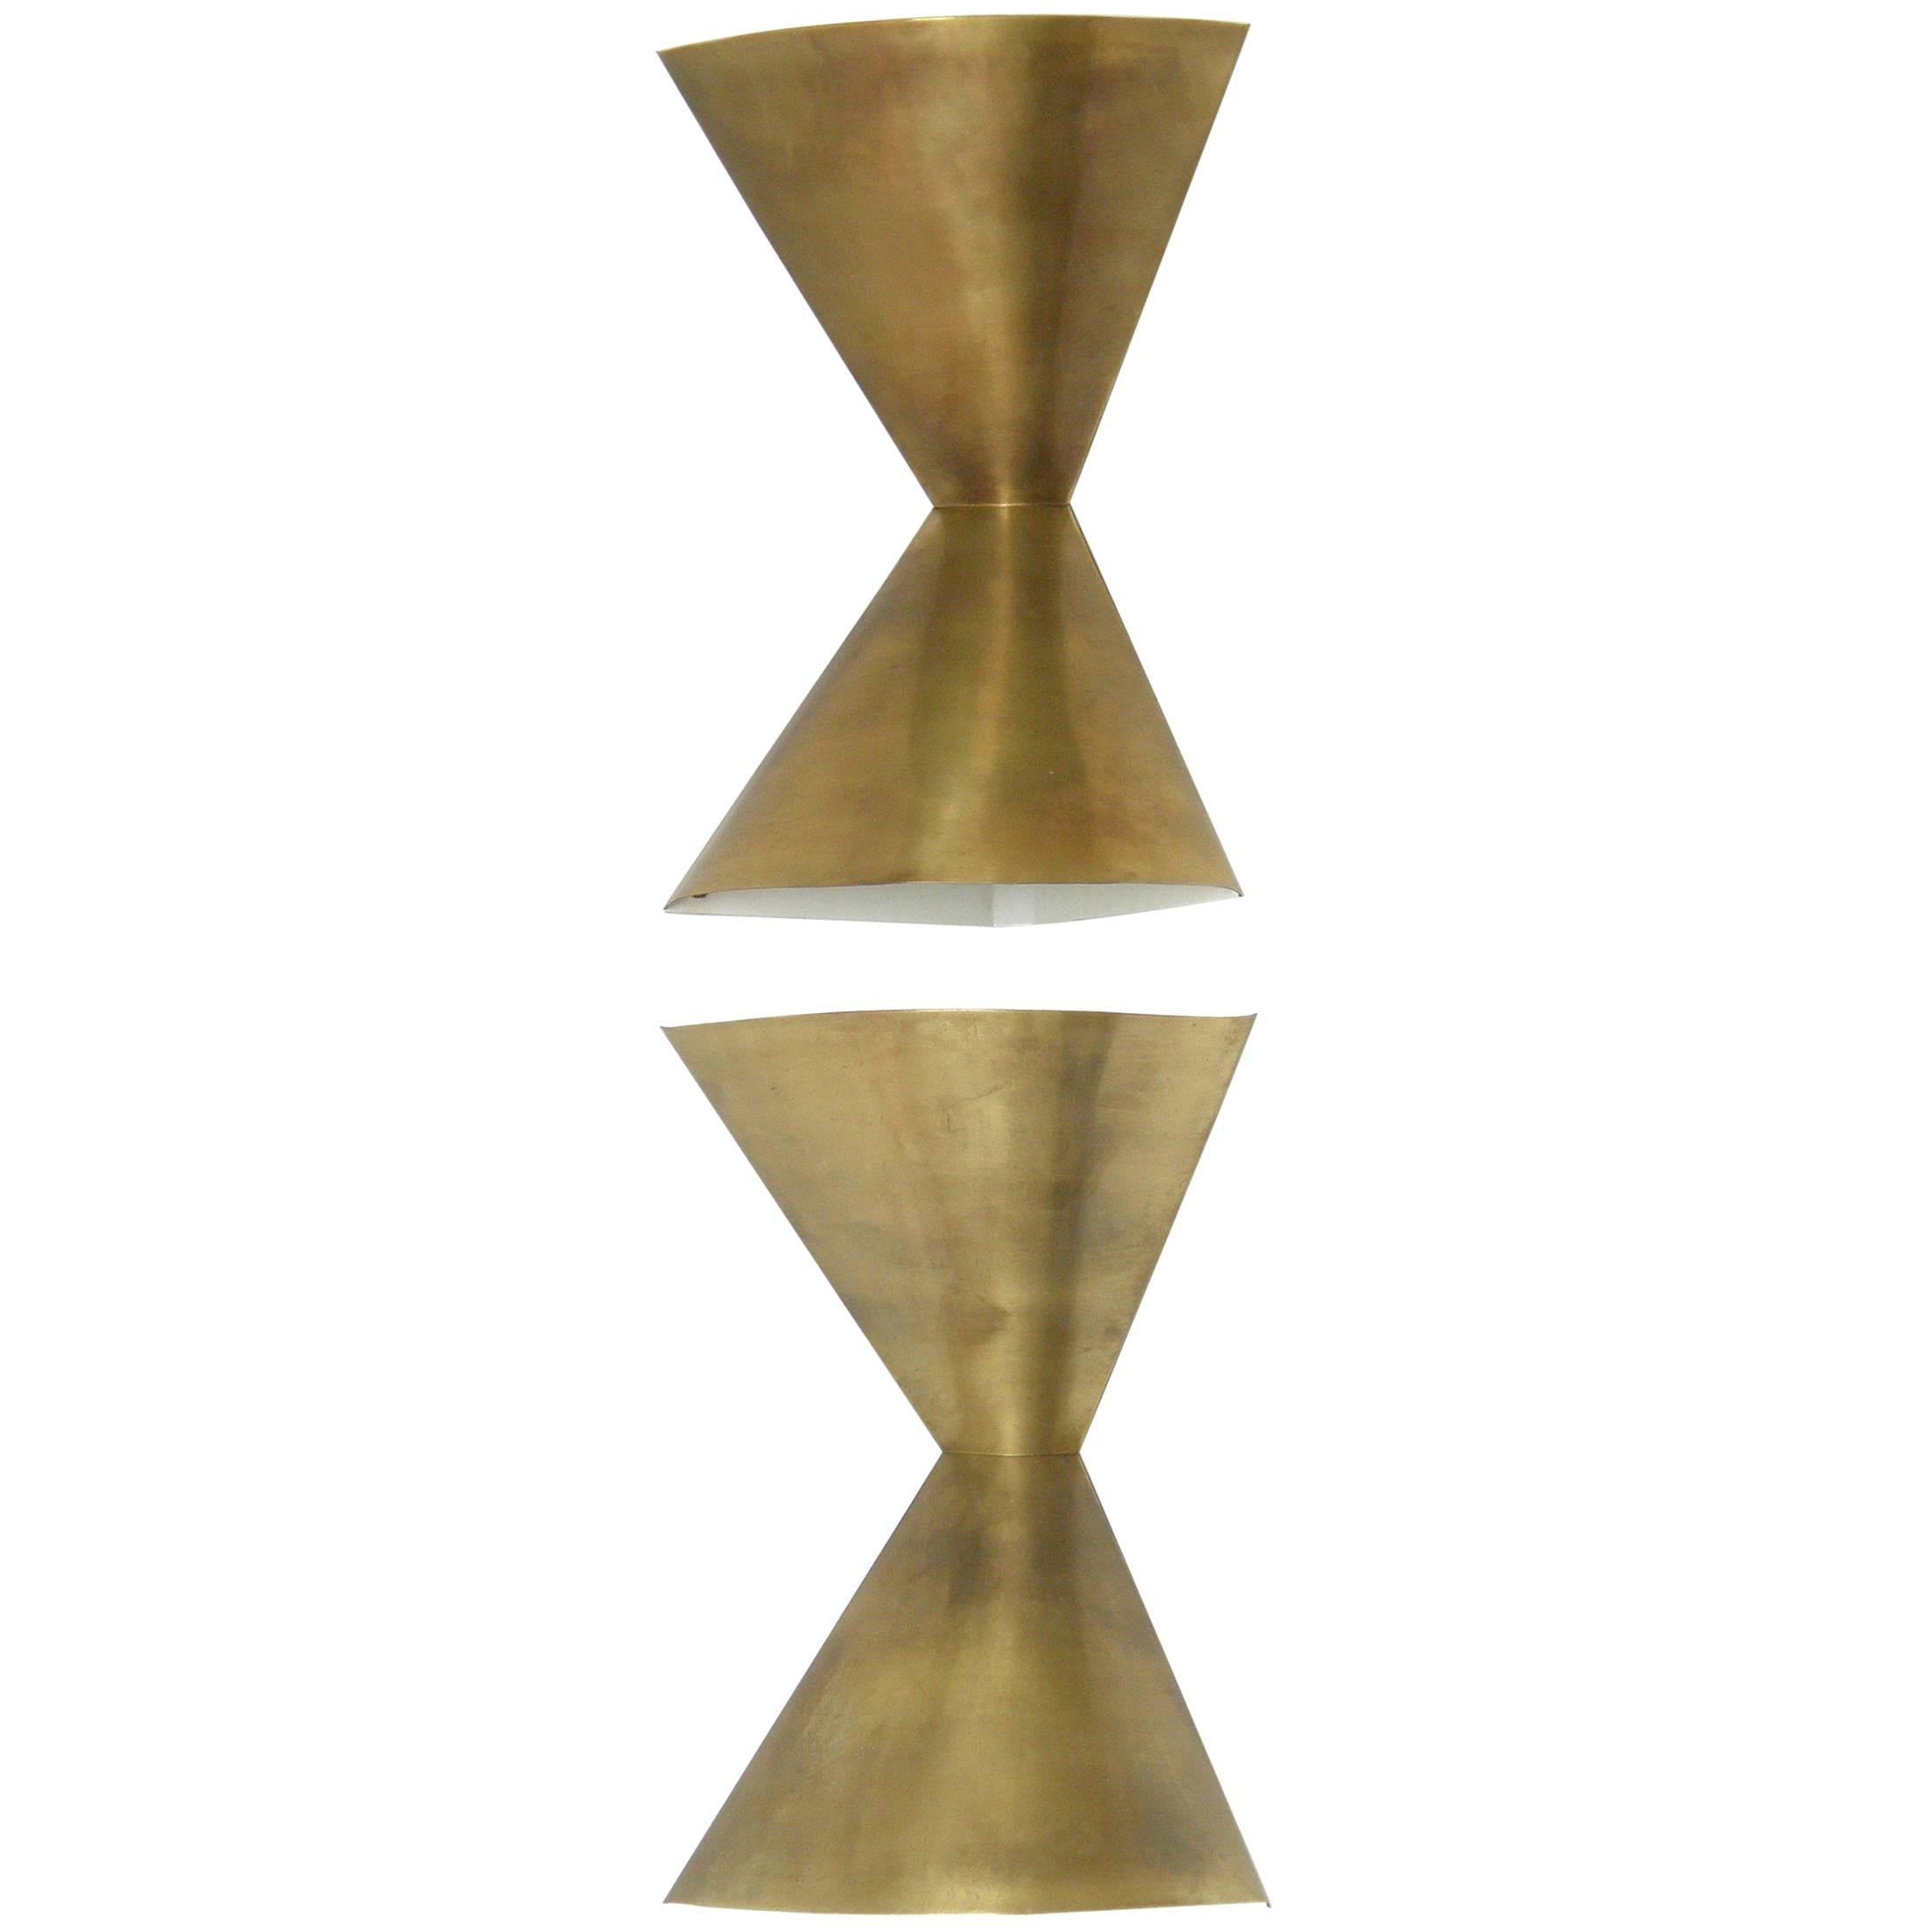 Edward Wormley Brass Corner Lamps for Lightolier with Upward and Downward Light